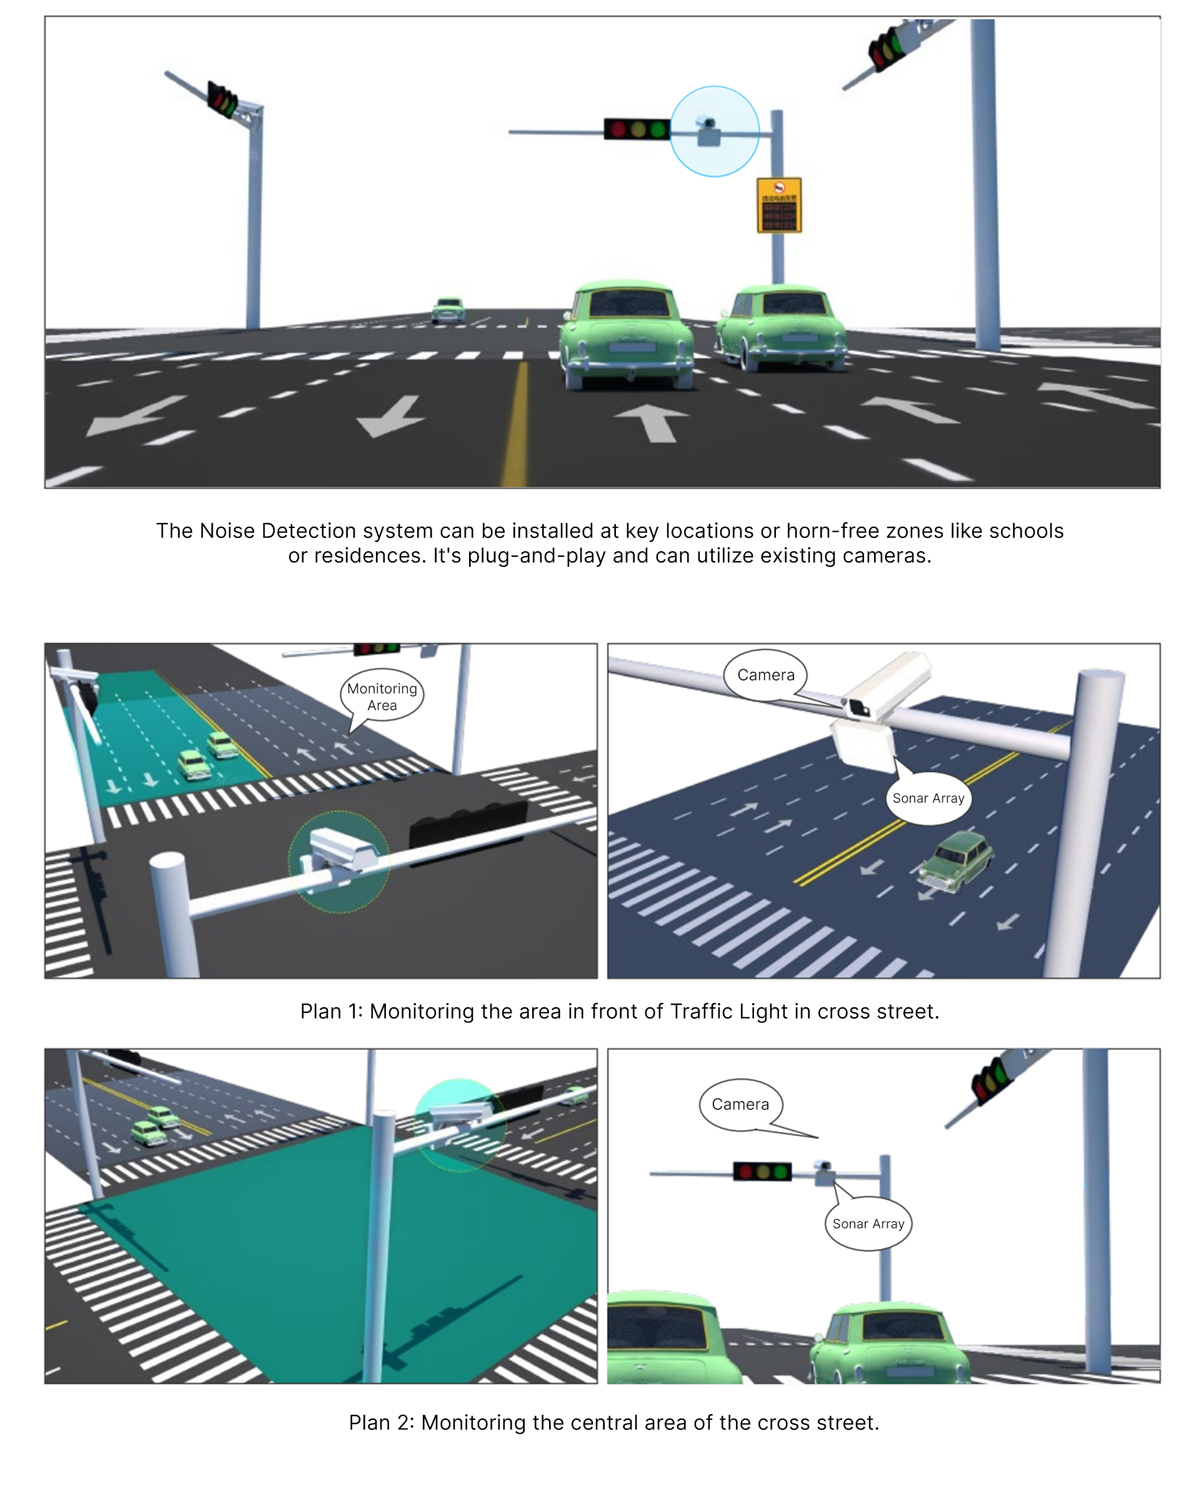 Noise detection system, sonar array panel. precise location, intelligent process, dust and water proof. mobile design, fast deploy, 360 capture. plug and ply and can utilize existing cameras. monitoring the area in front of traffic light in cross street